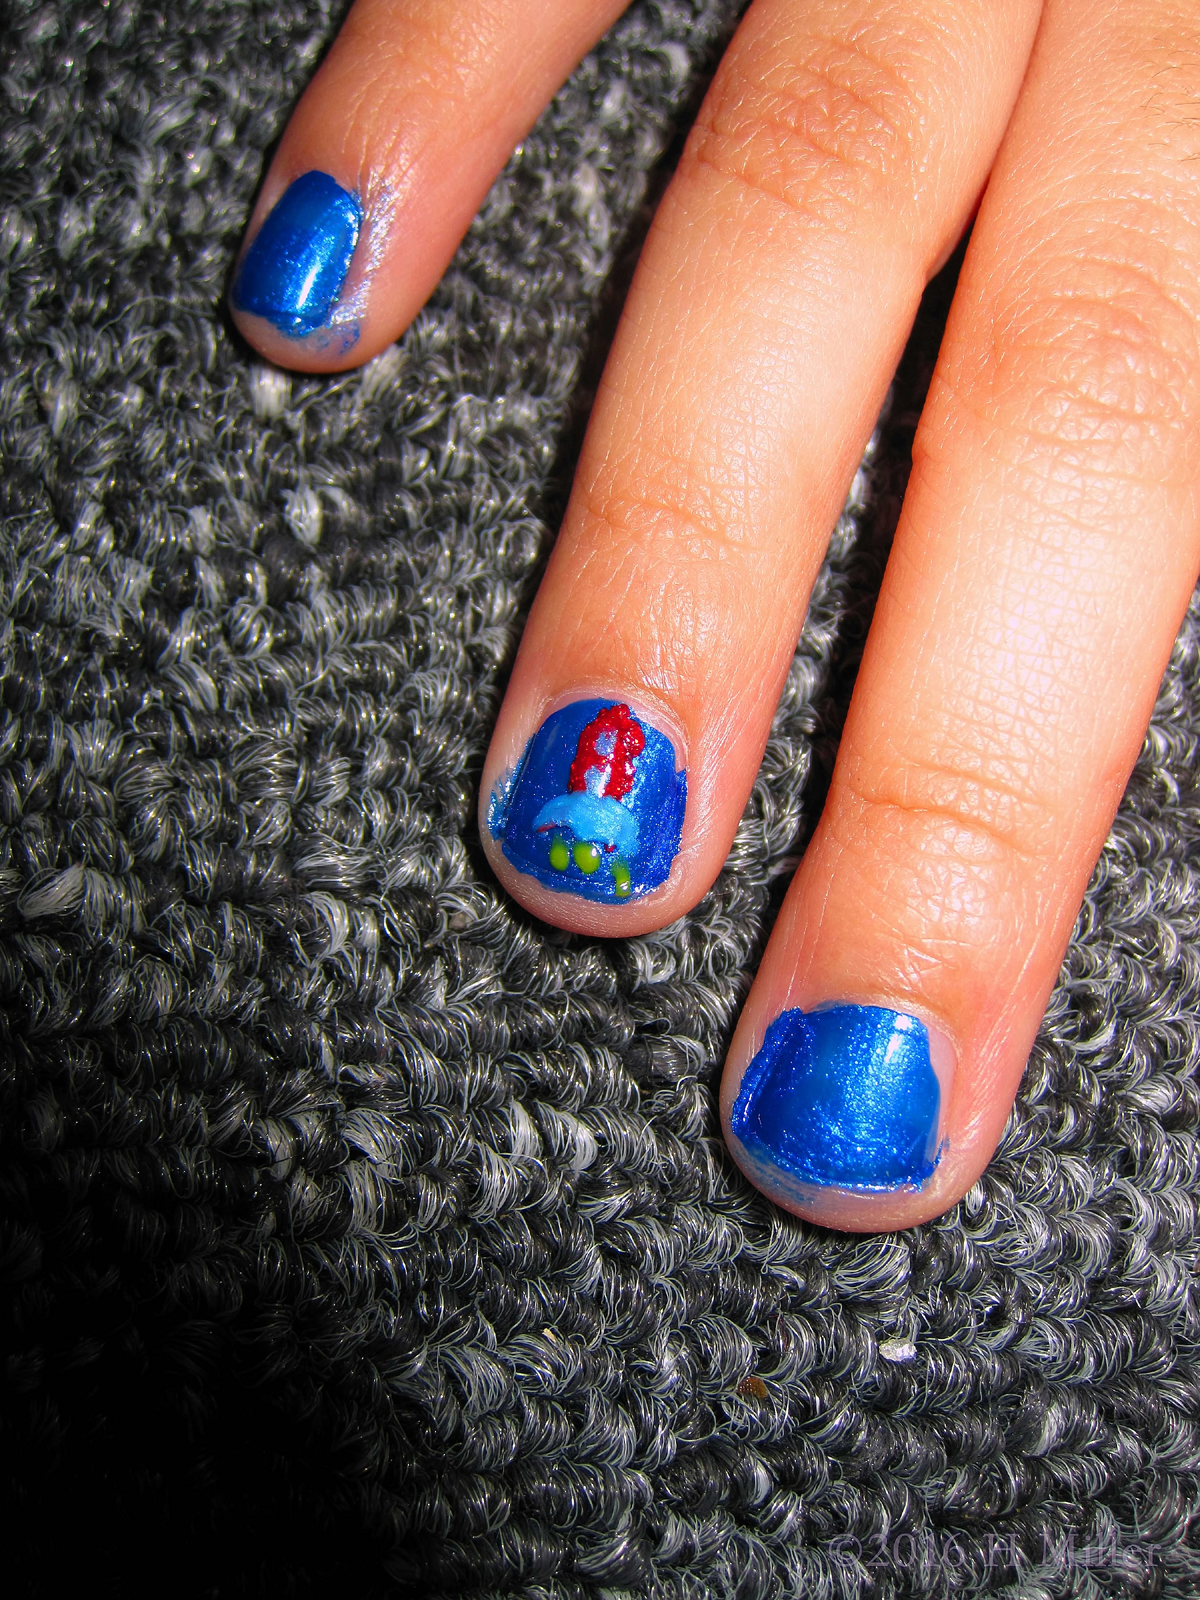 Cool Blue Kids Manicure With An Outer Space Rocket Nail Design!